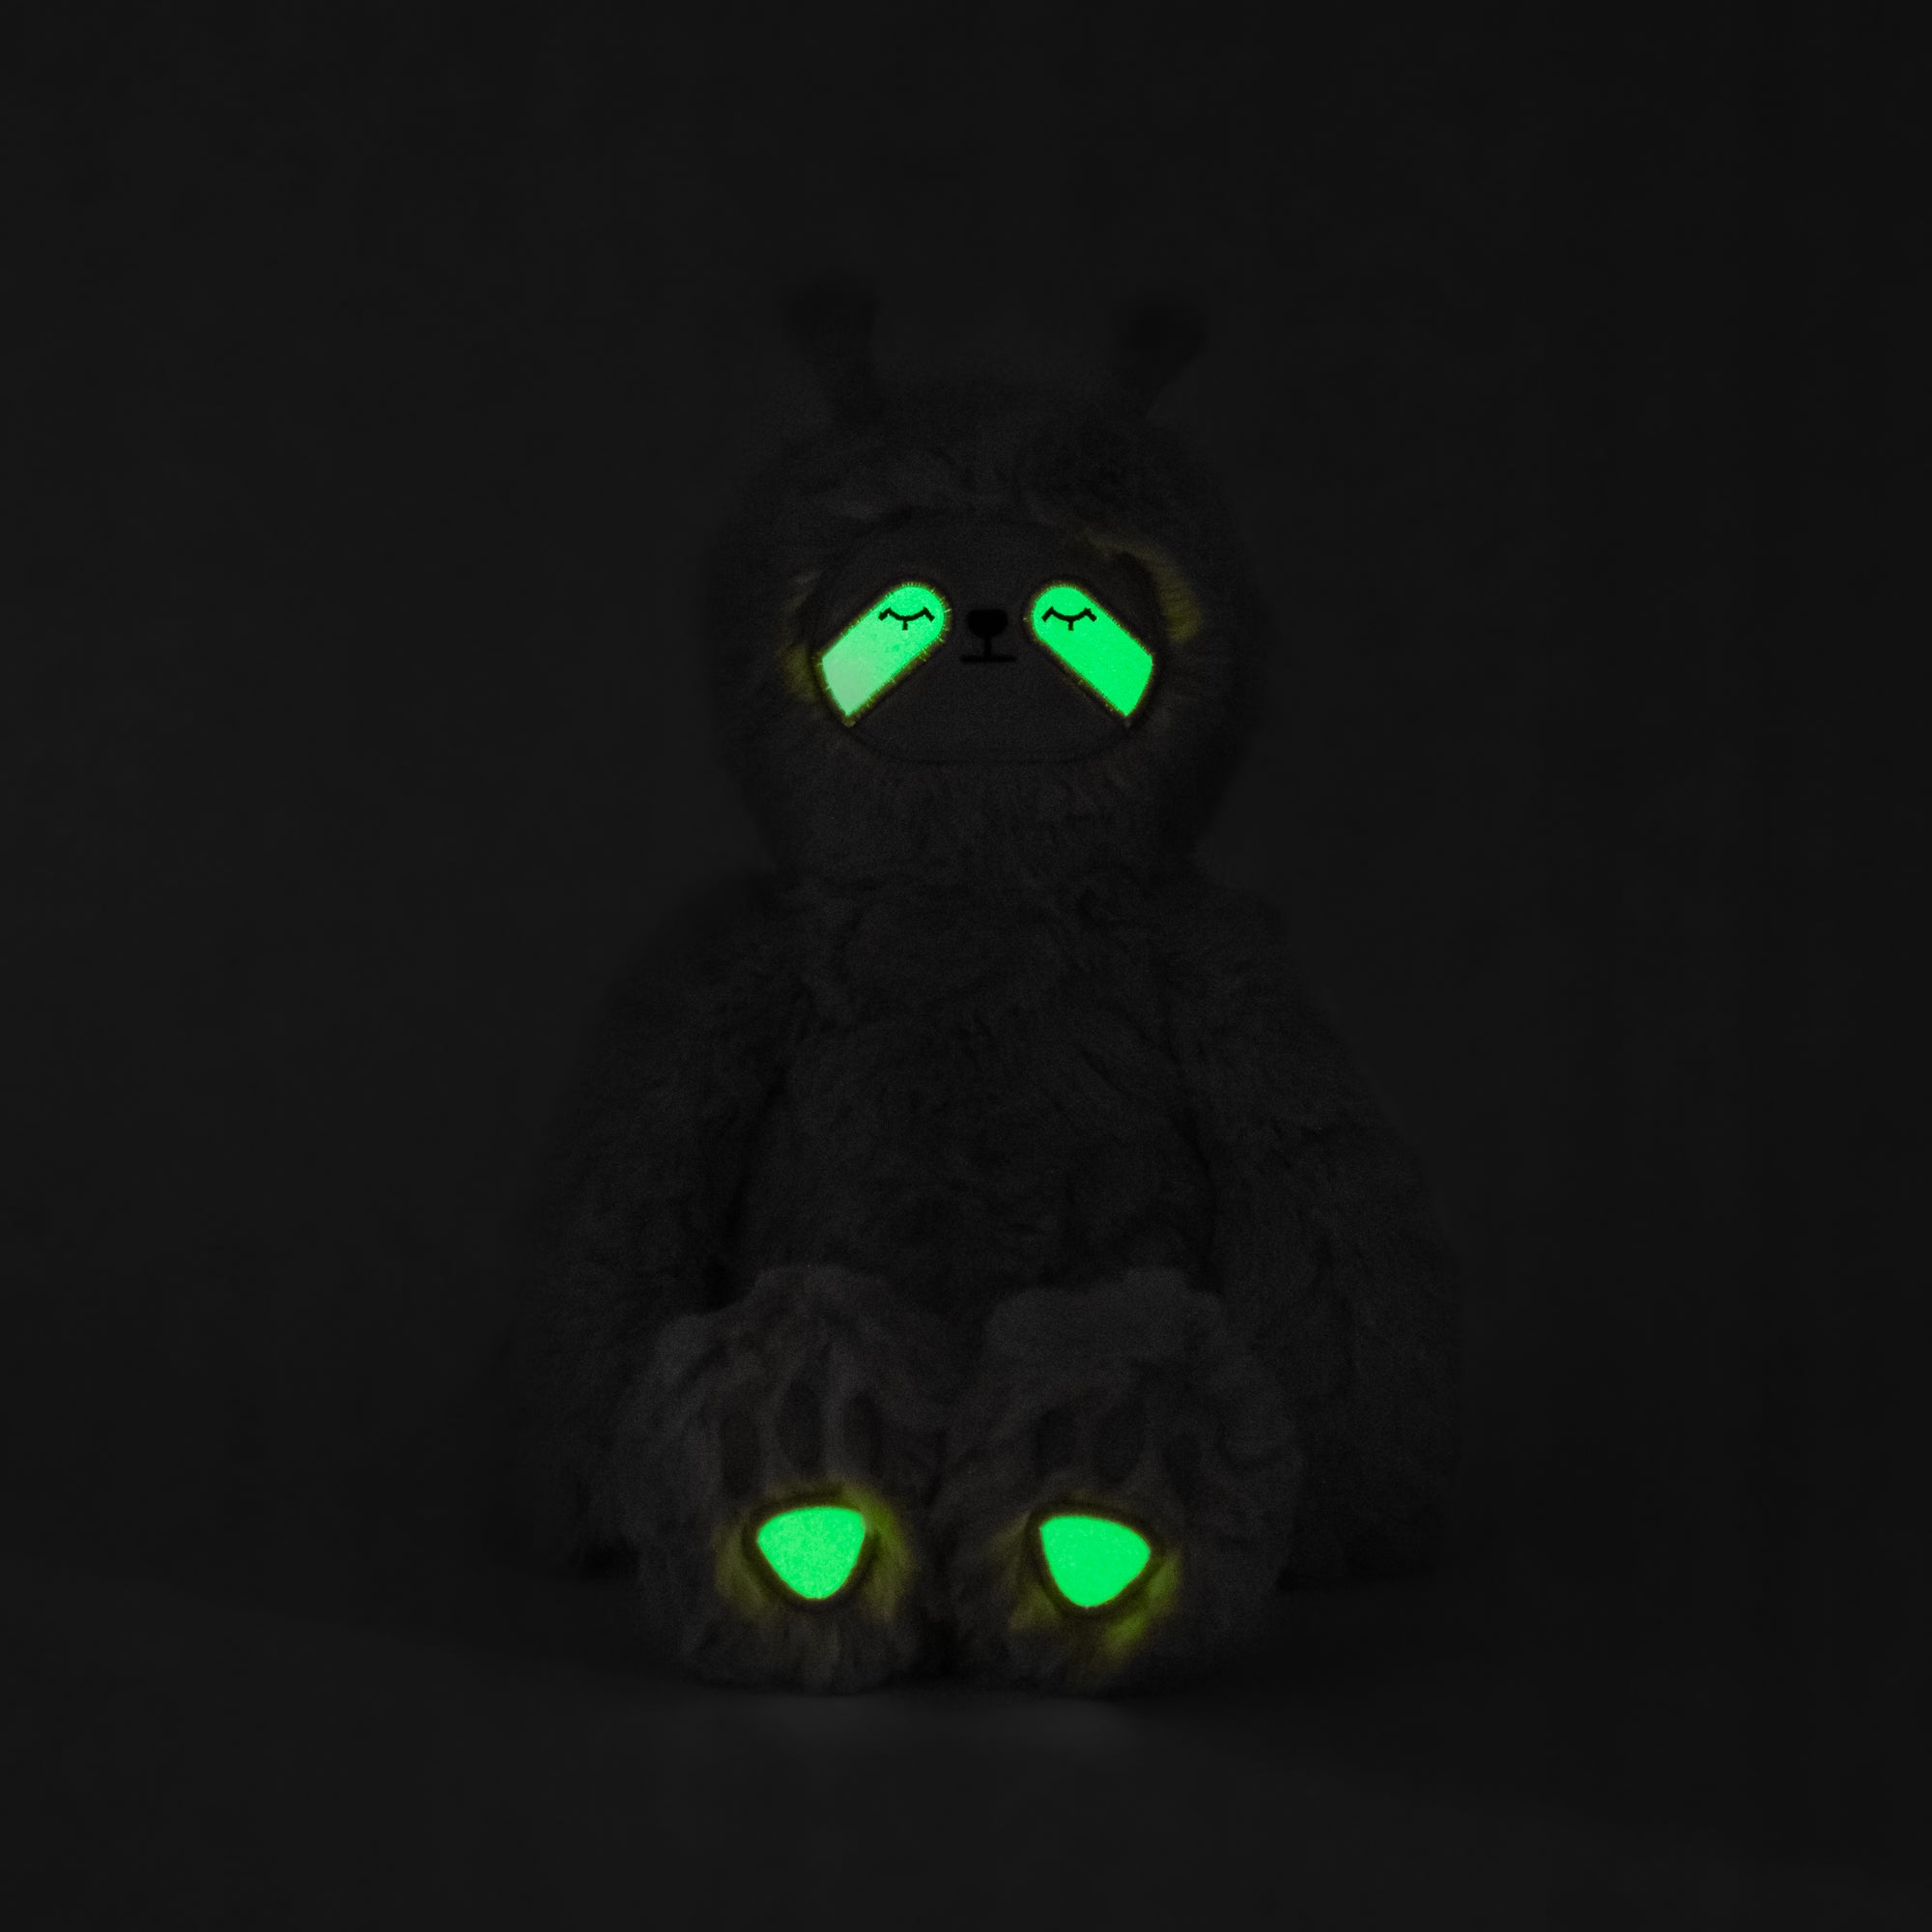 Glow In The Dark Set - View Product